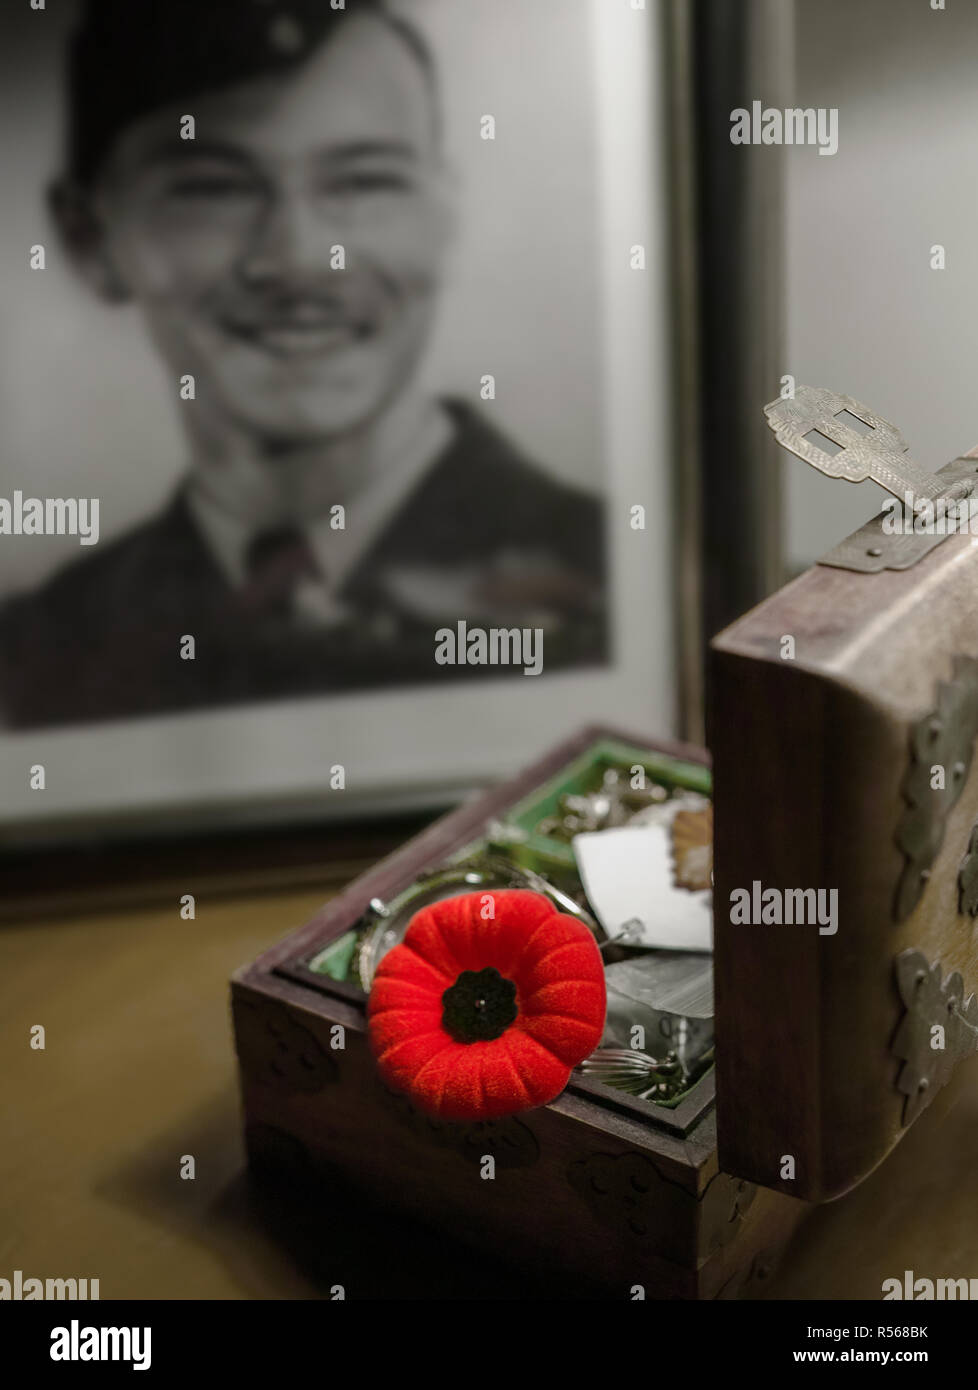 We see in the background the portrait of the disappeared soldier. In front, in the opened jewelry box someone also keeps a poppy. Stock Photo